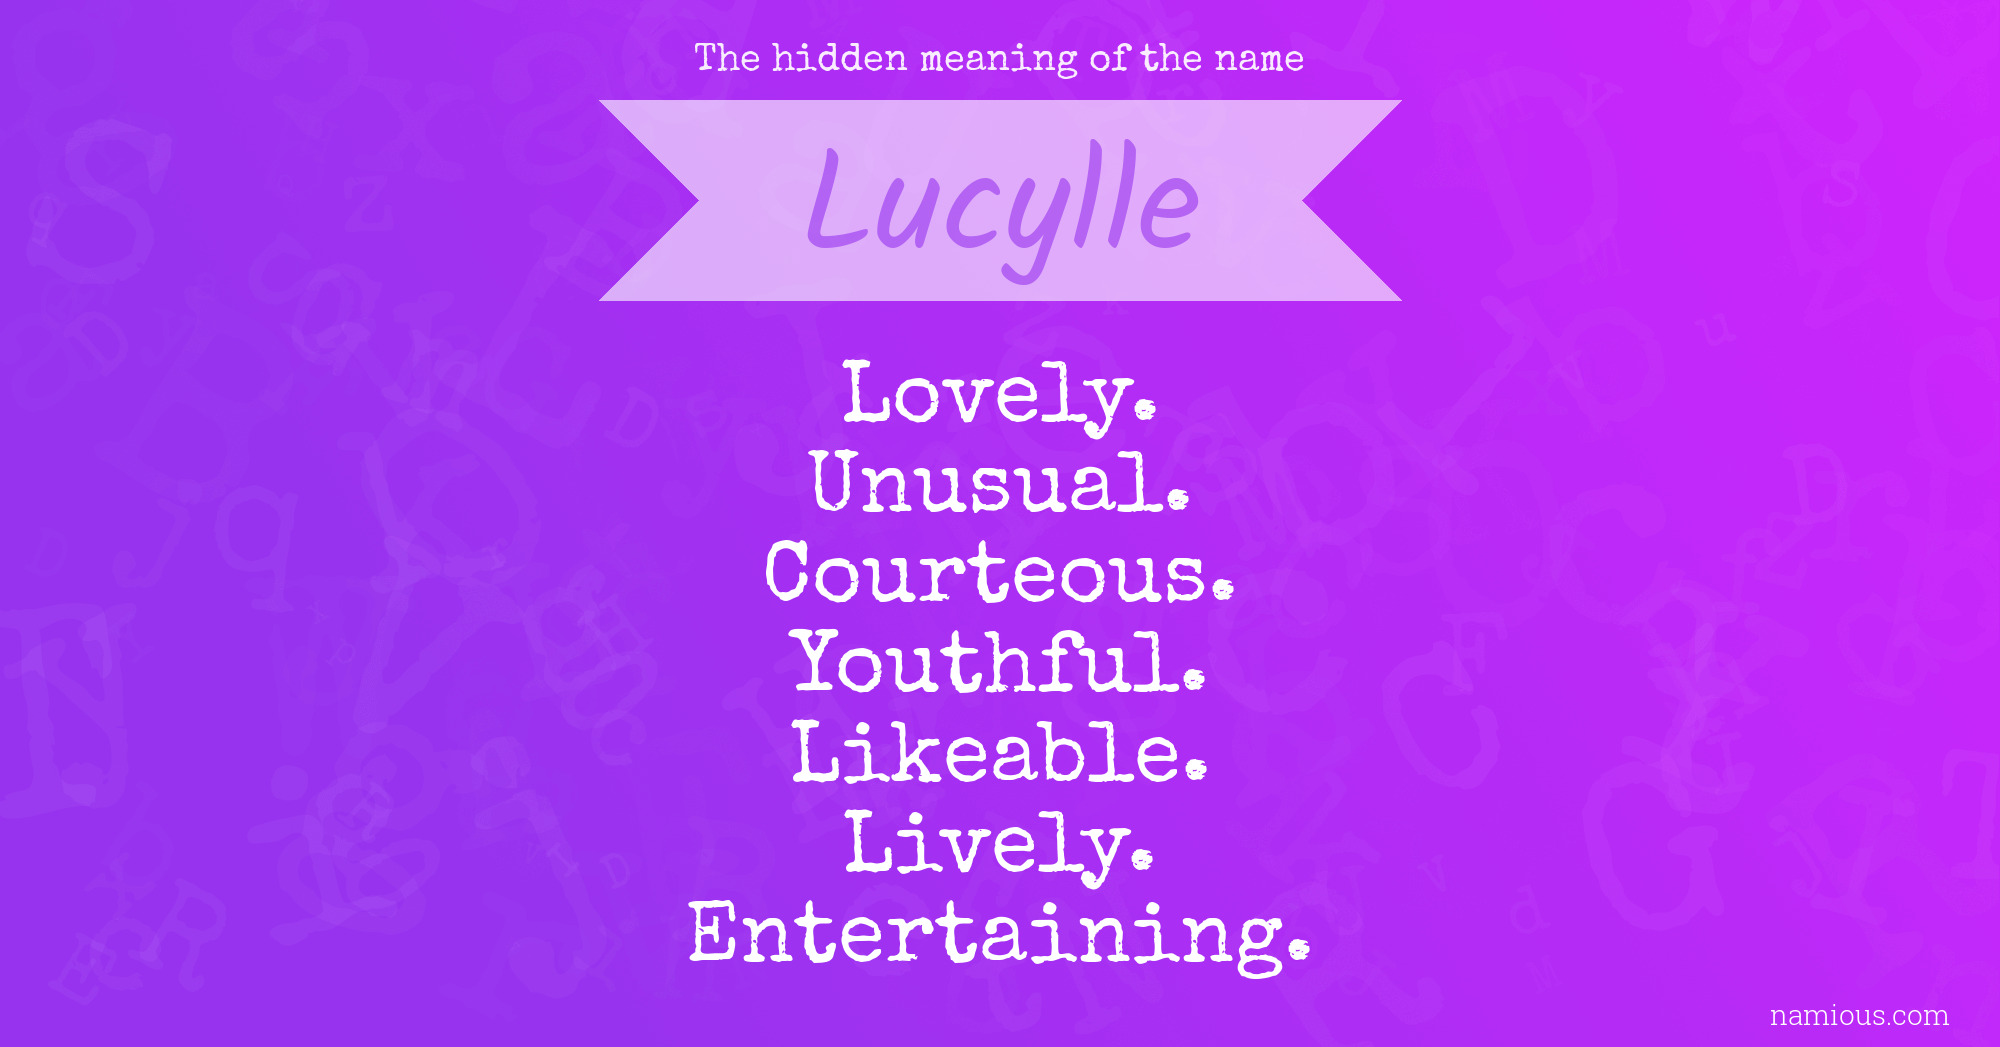 The hidden meaning of the name Lucylle